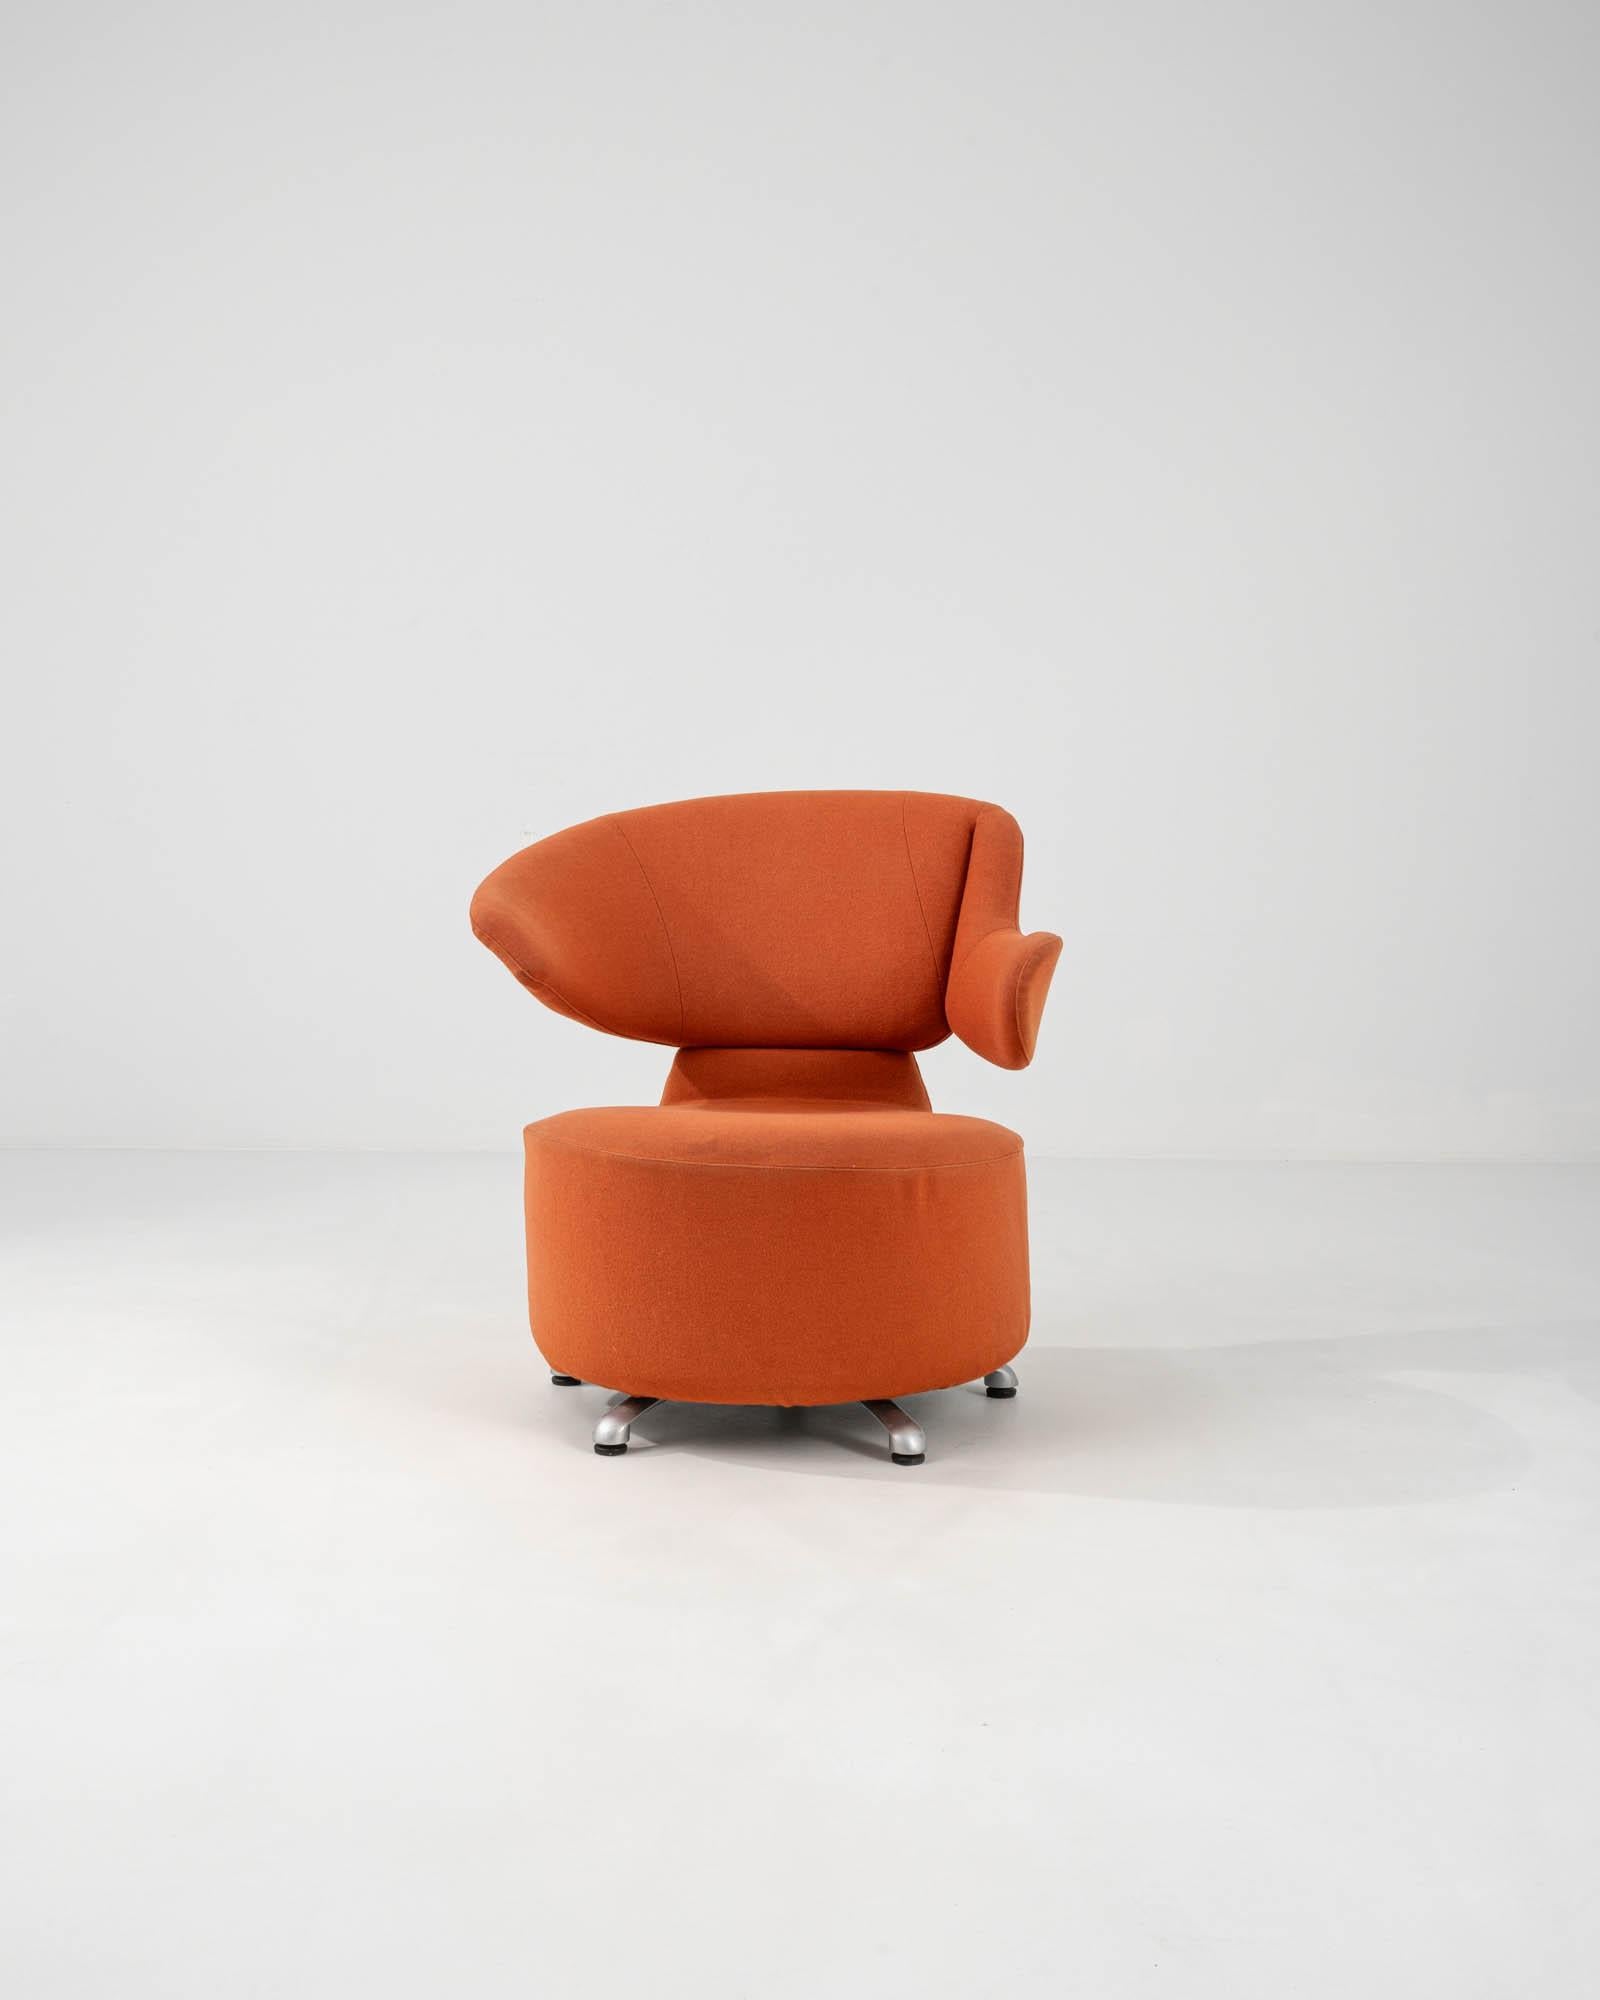 Embrace the fusion of Italian craftsmanship and innovative design with this 20th-century Italian swivel armchair by Cassina. Its bold terracotta upholstery radiates warmth and adds a pop of color to any interior. With a distinctive high back and